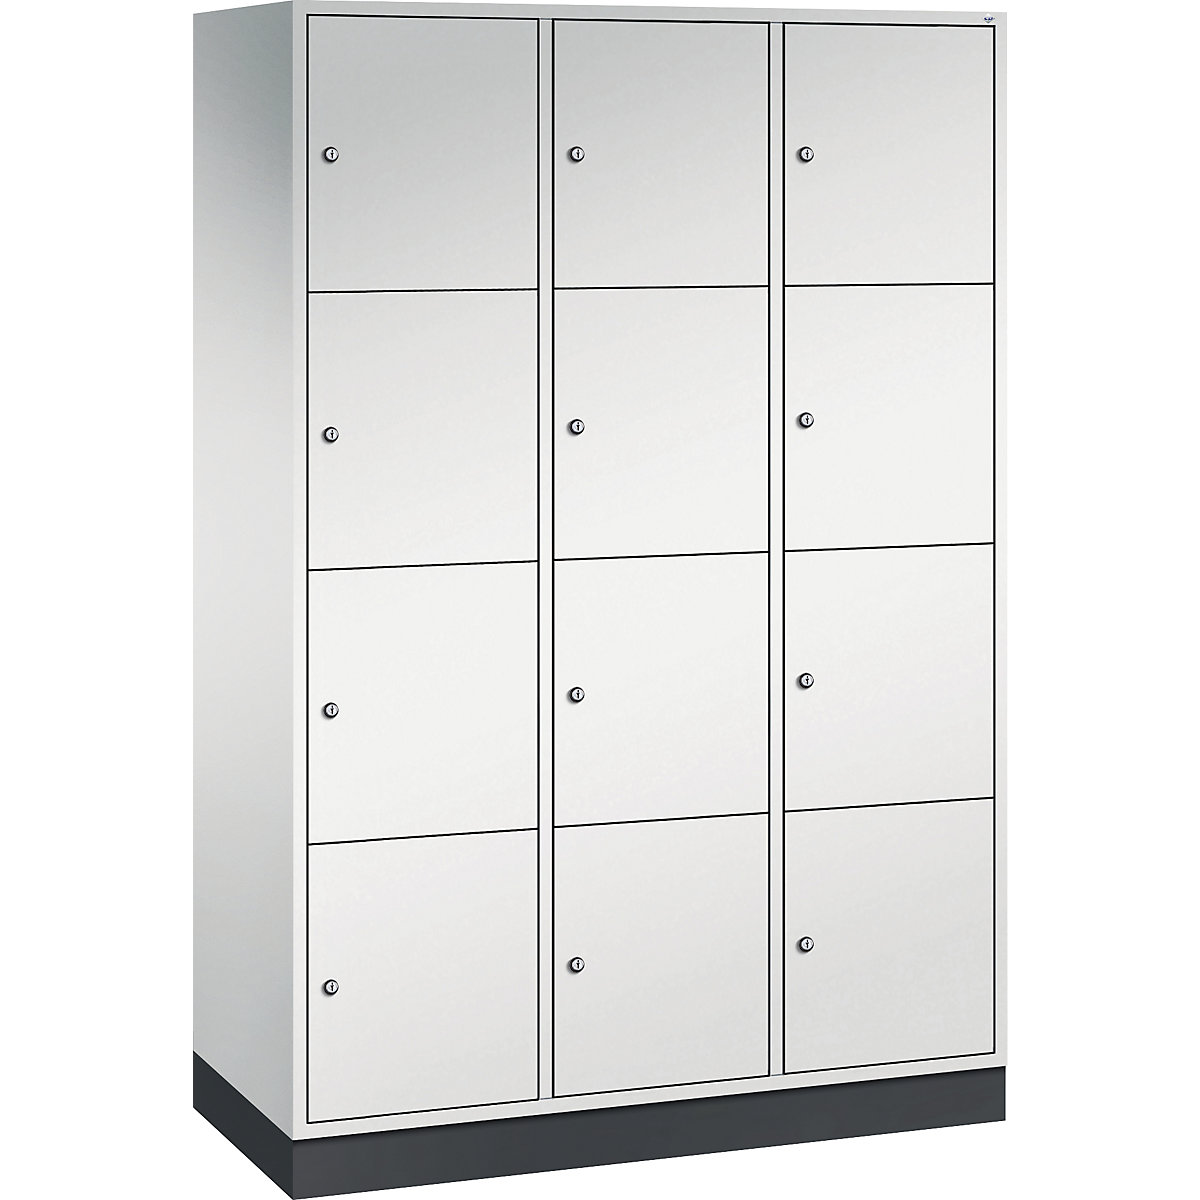 INTRO steel compartment locker, compartment height 435 mm – C+P, WxD 1220 x 500 mm, 12 compartments, light grey body, light grey doors